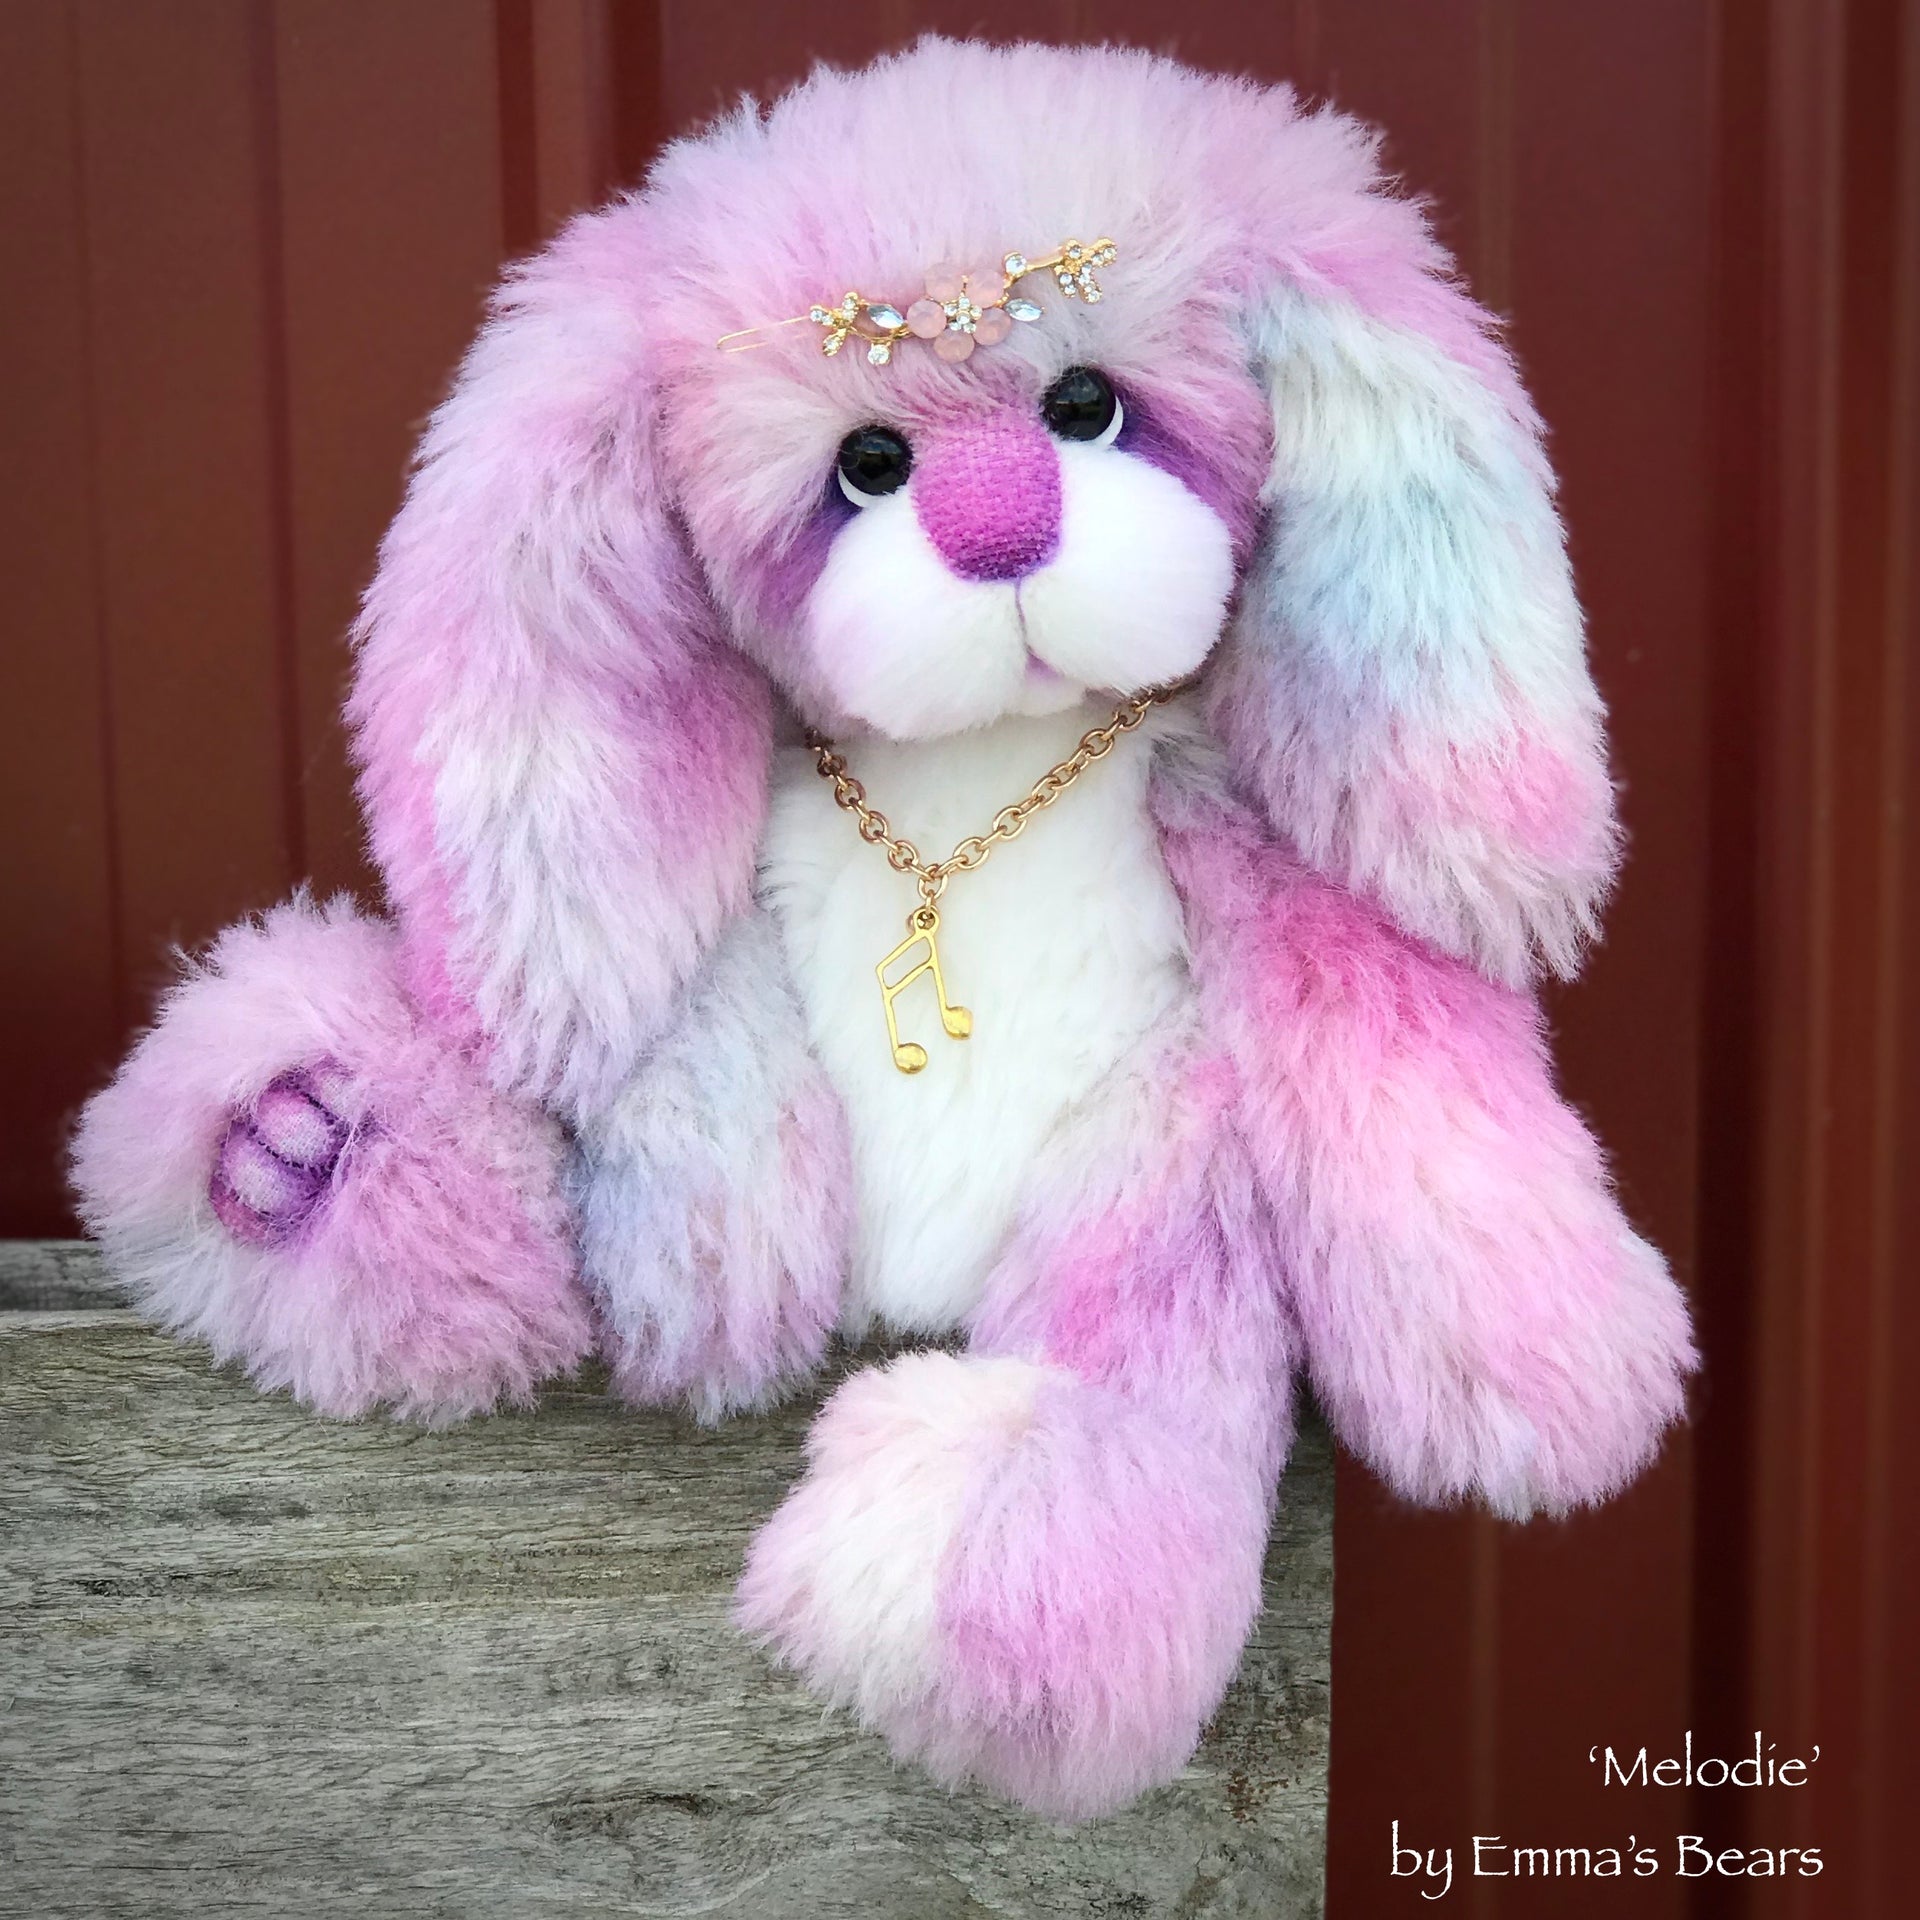 Melodie - 12" Alpaca and Faux Fur Artist Easter Bunny by Emma's Bears - OOAK